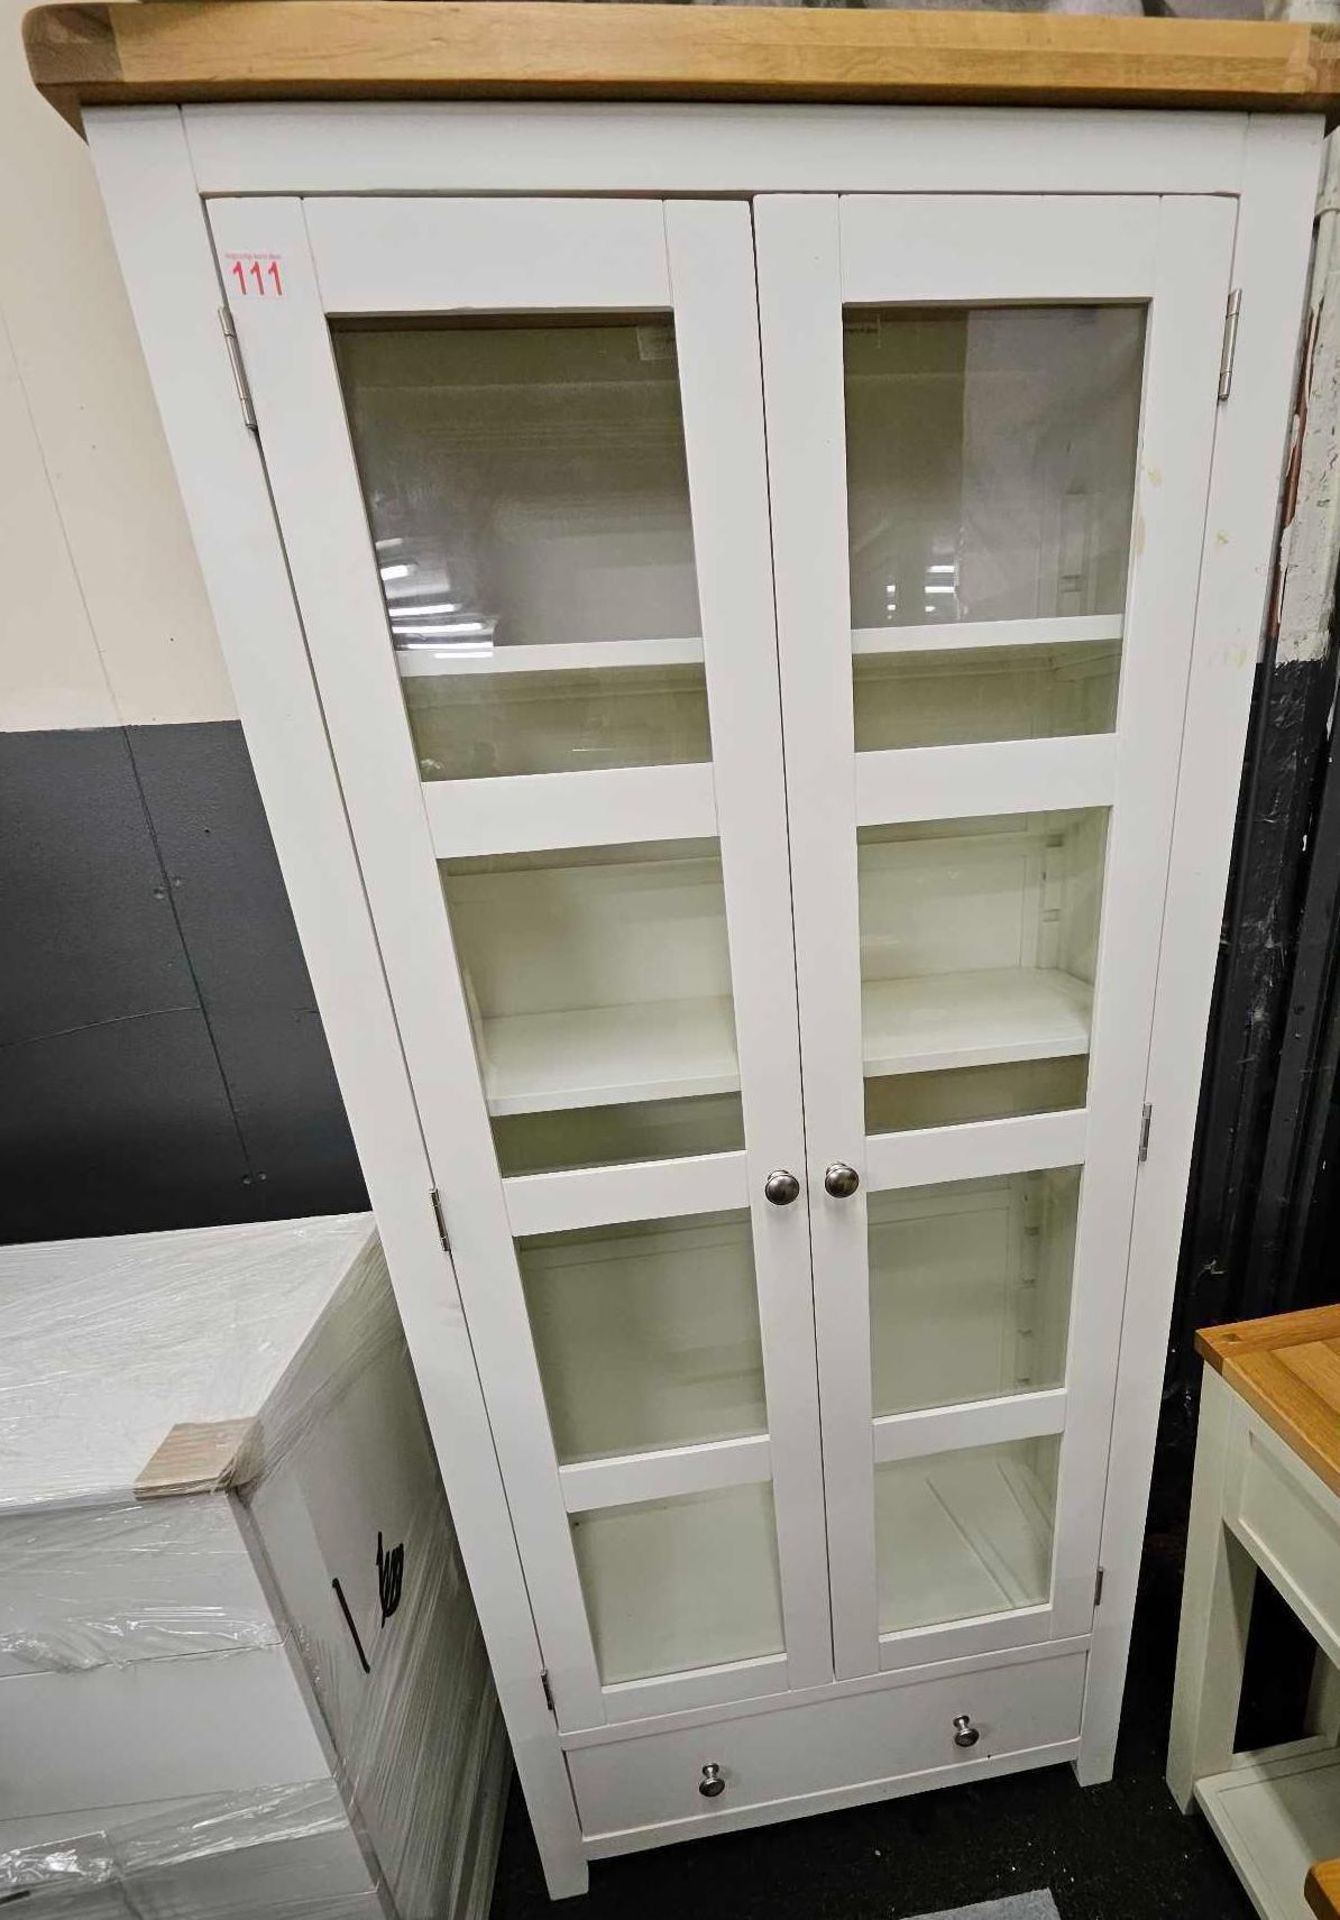 *EX DISPLAY*Melbourne ivory white 2 door glass display cupboard with base drawer and natural oak top